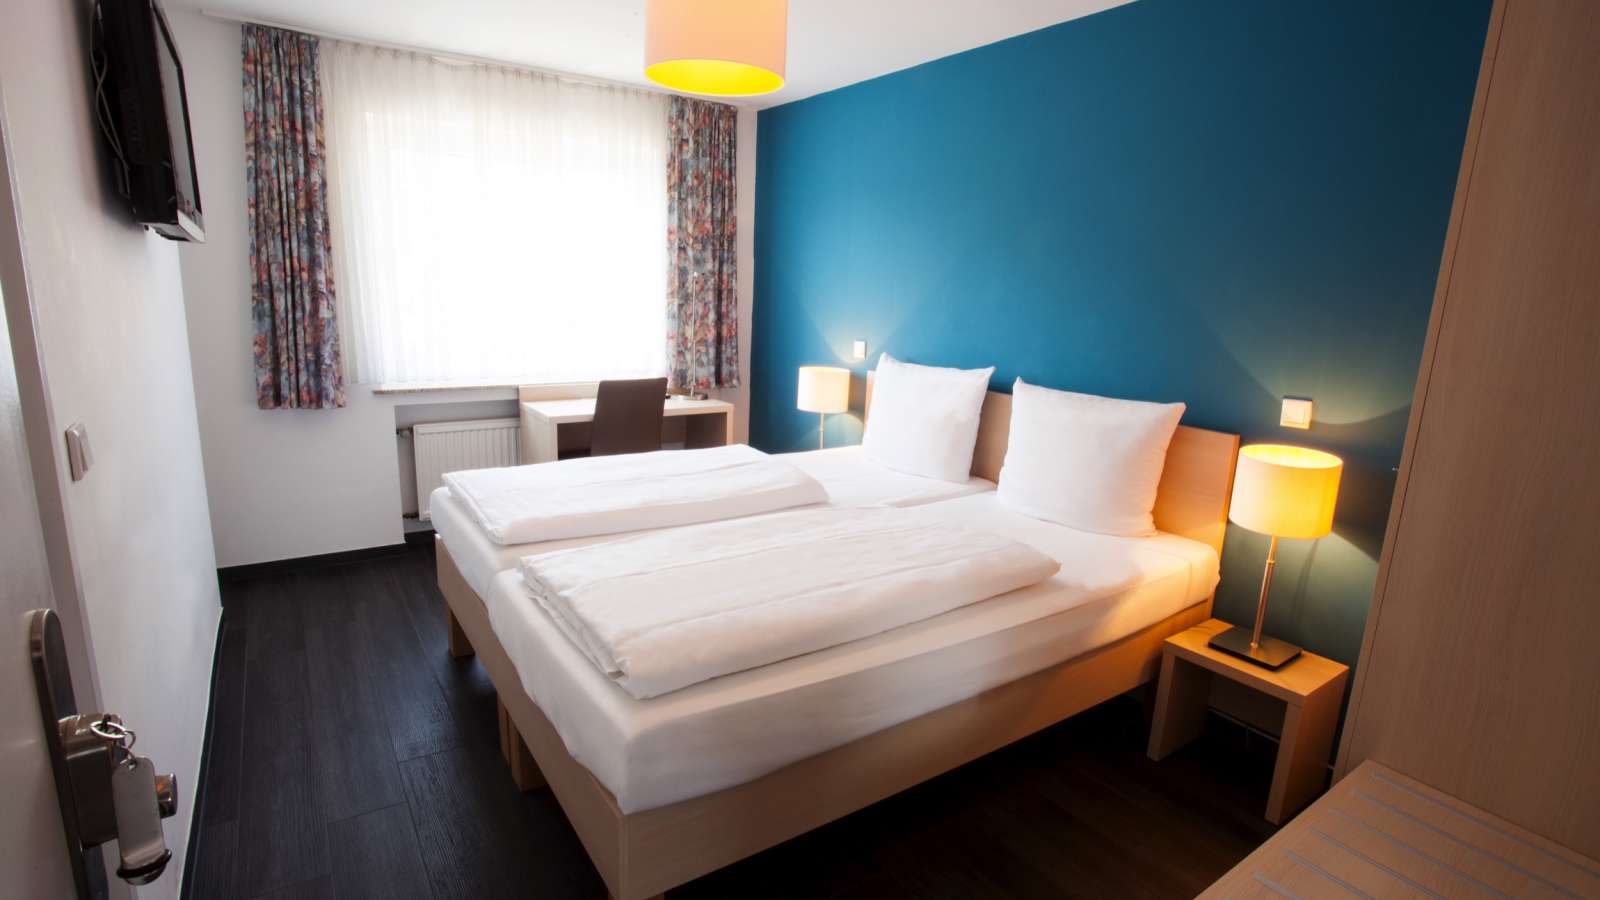 A double room at Centro Hotel Arkadia in Cologne